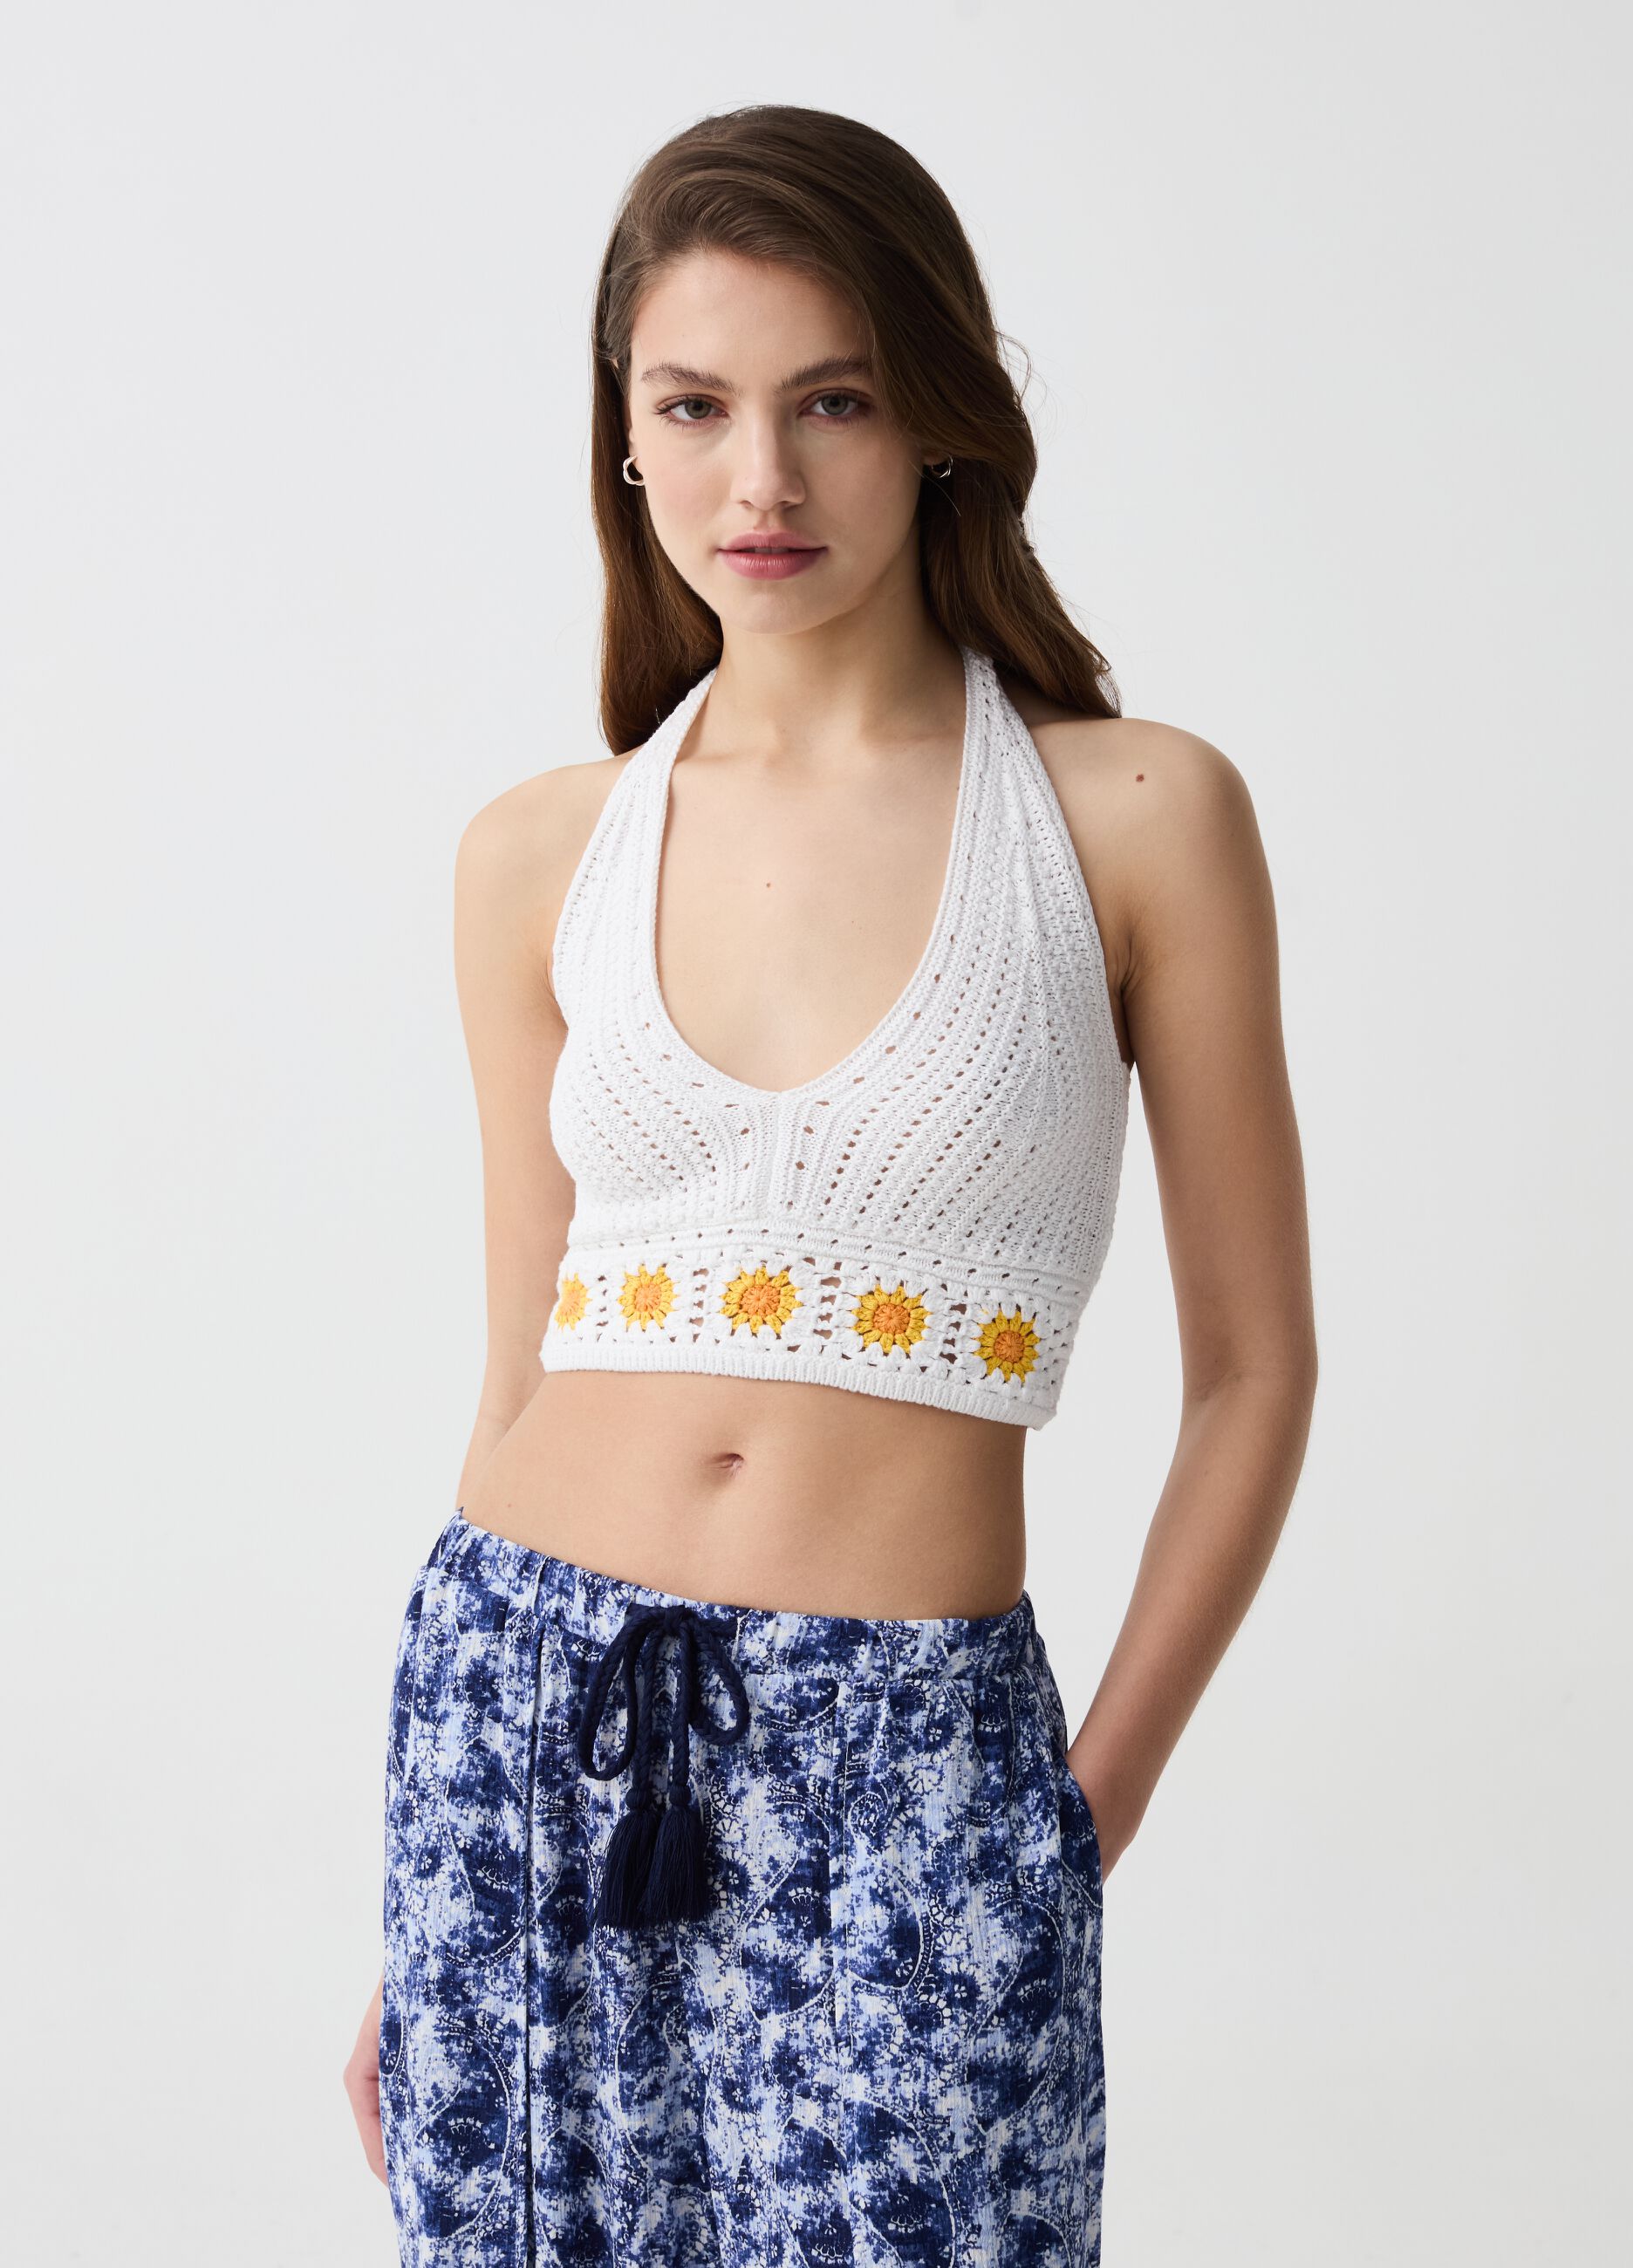 Crochet crop top with flowers embroidery